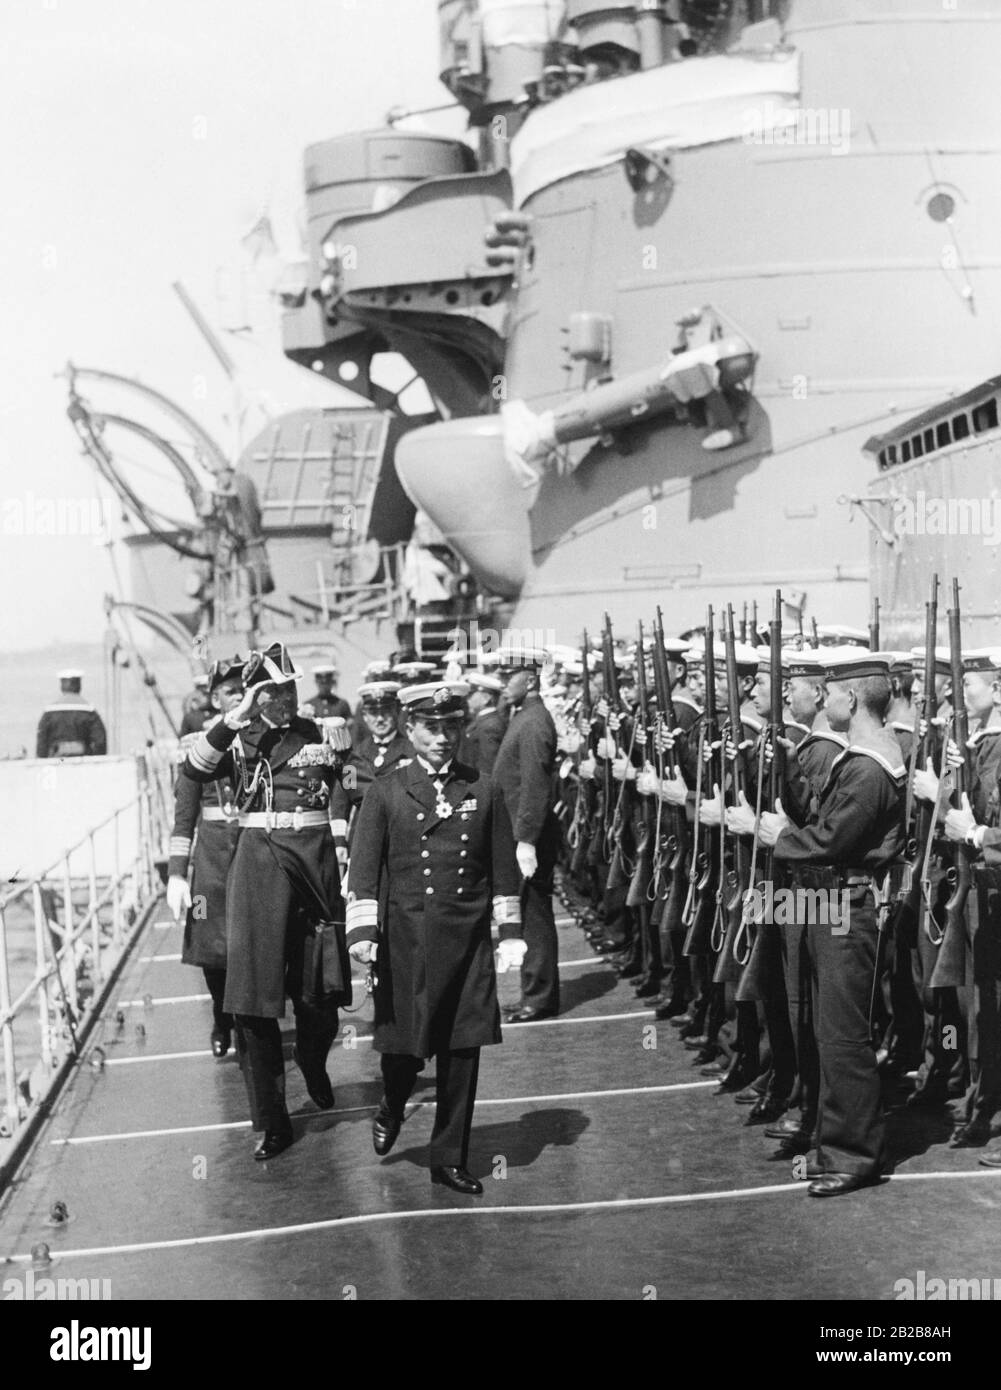 During a visit on the cruiser Ashigara of the Imperial Japanese Navy in Kiel, the German Vice Admiral Carls and the Japanese Rear Admiral Kobayashi inspect the crew of the ship. Stock Photo